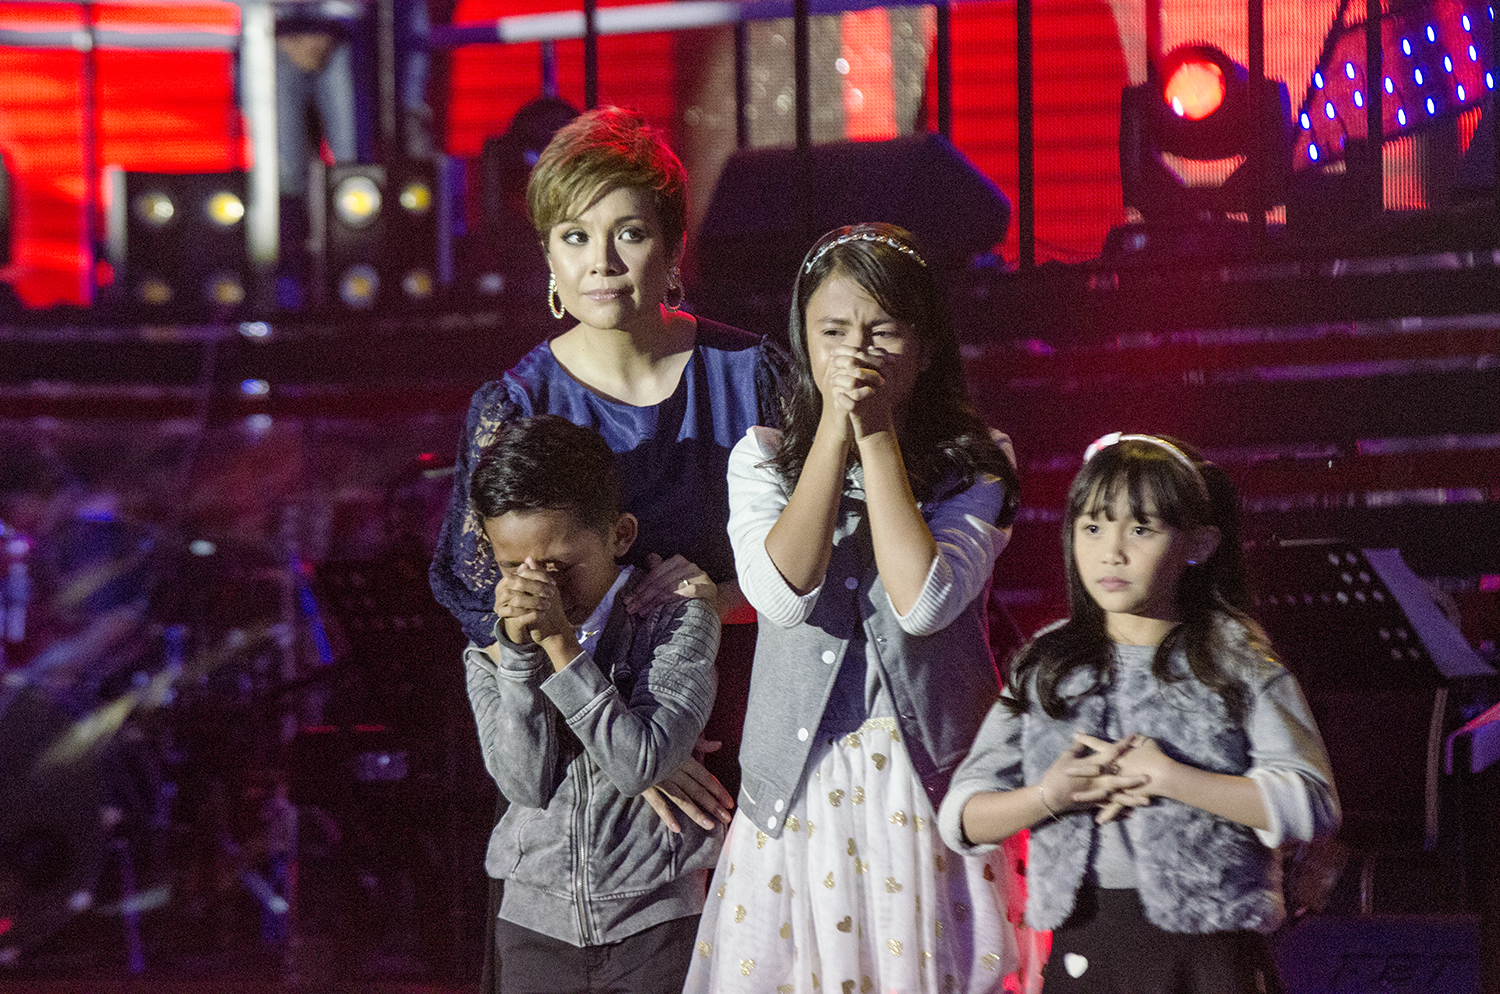 IN PHOTOS Emotional 'Voice Kids PH' Top 3 reveal